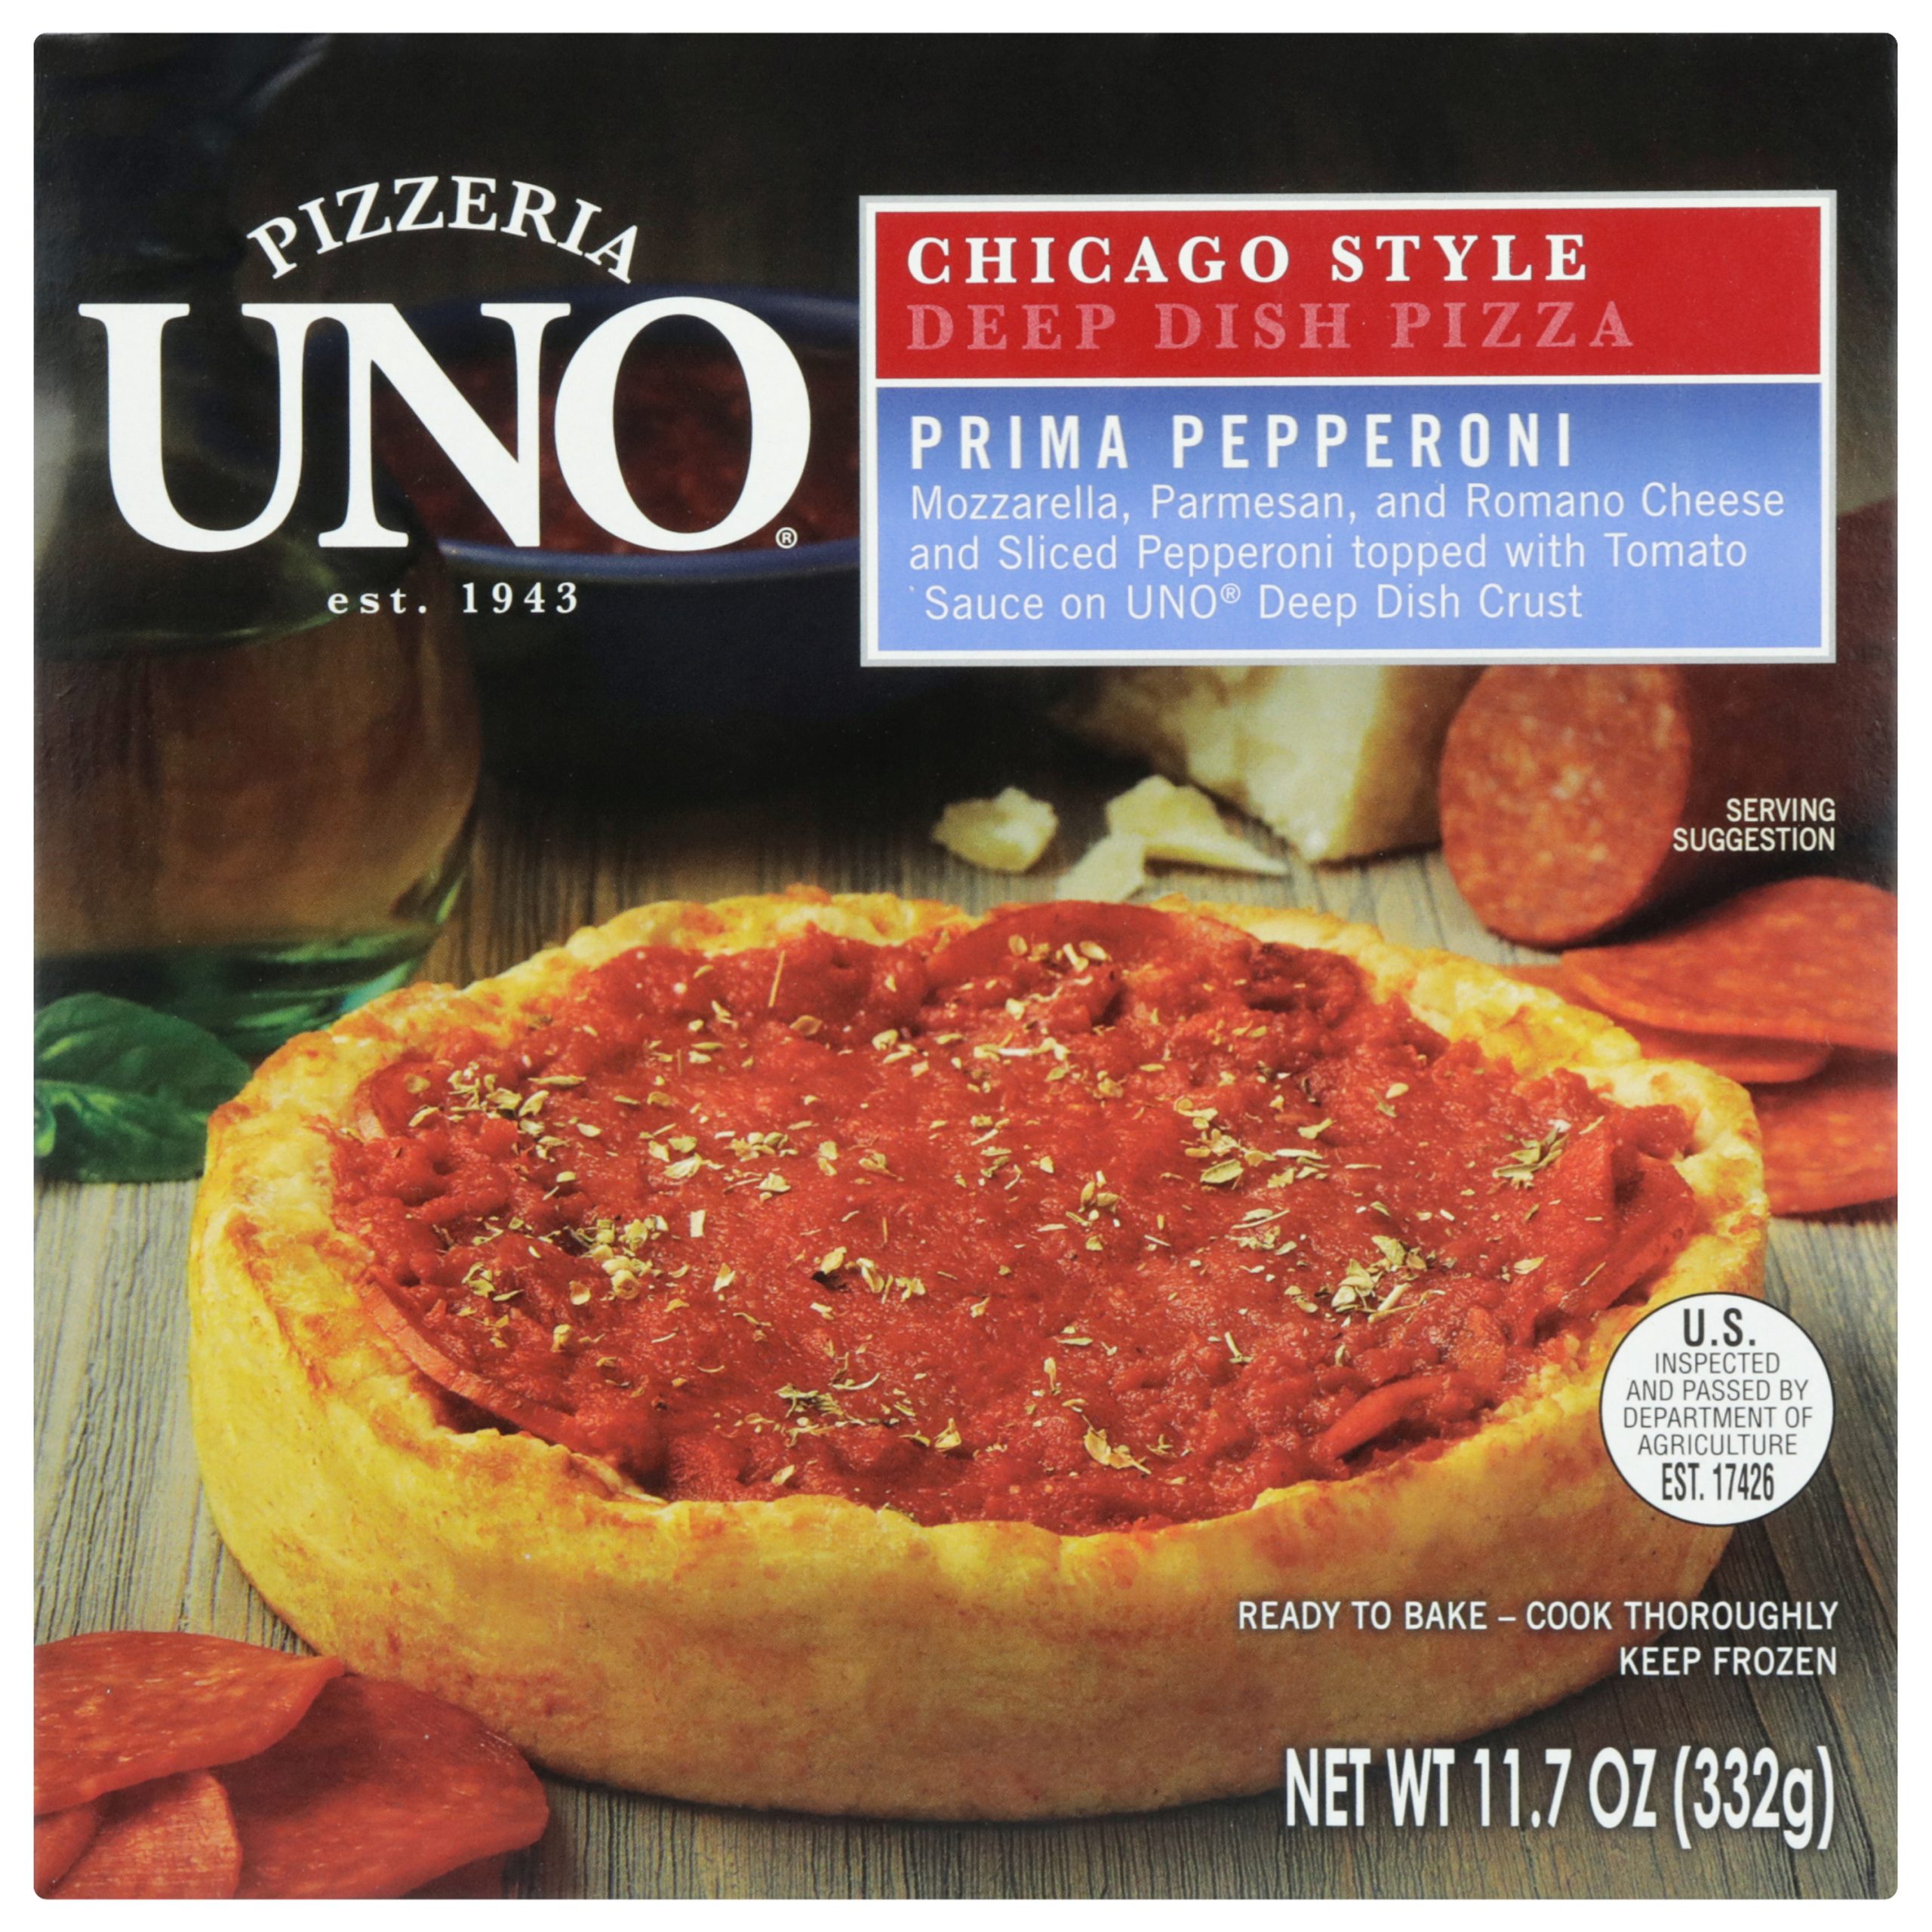 6 inch Chicago Style Deep Dish Pepperoni Pizza